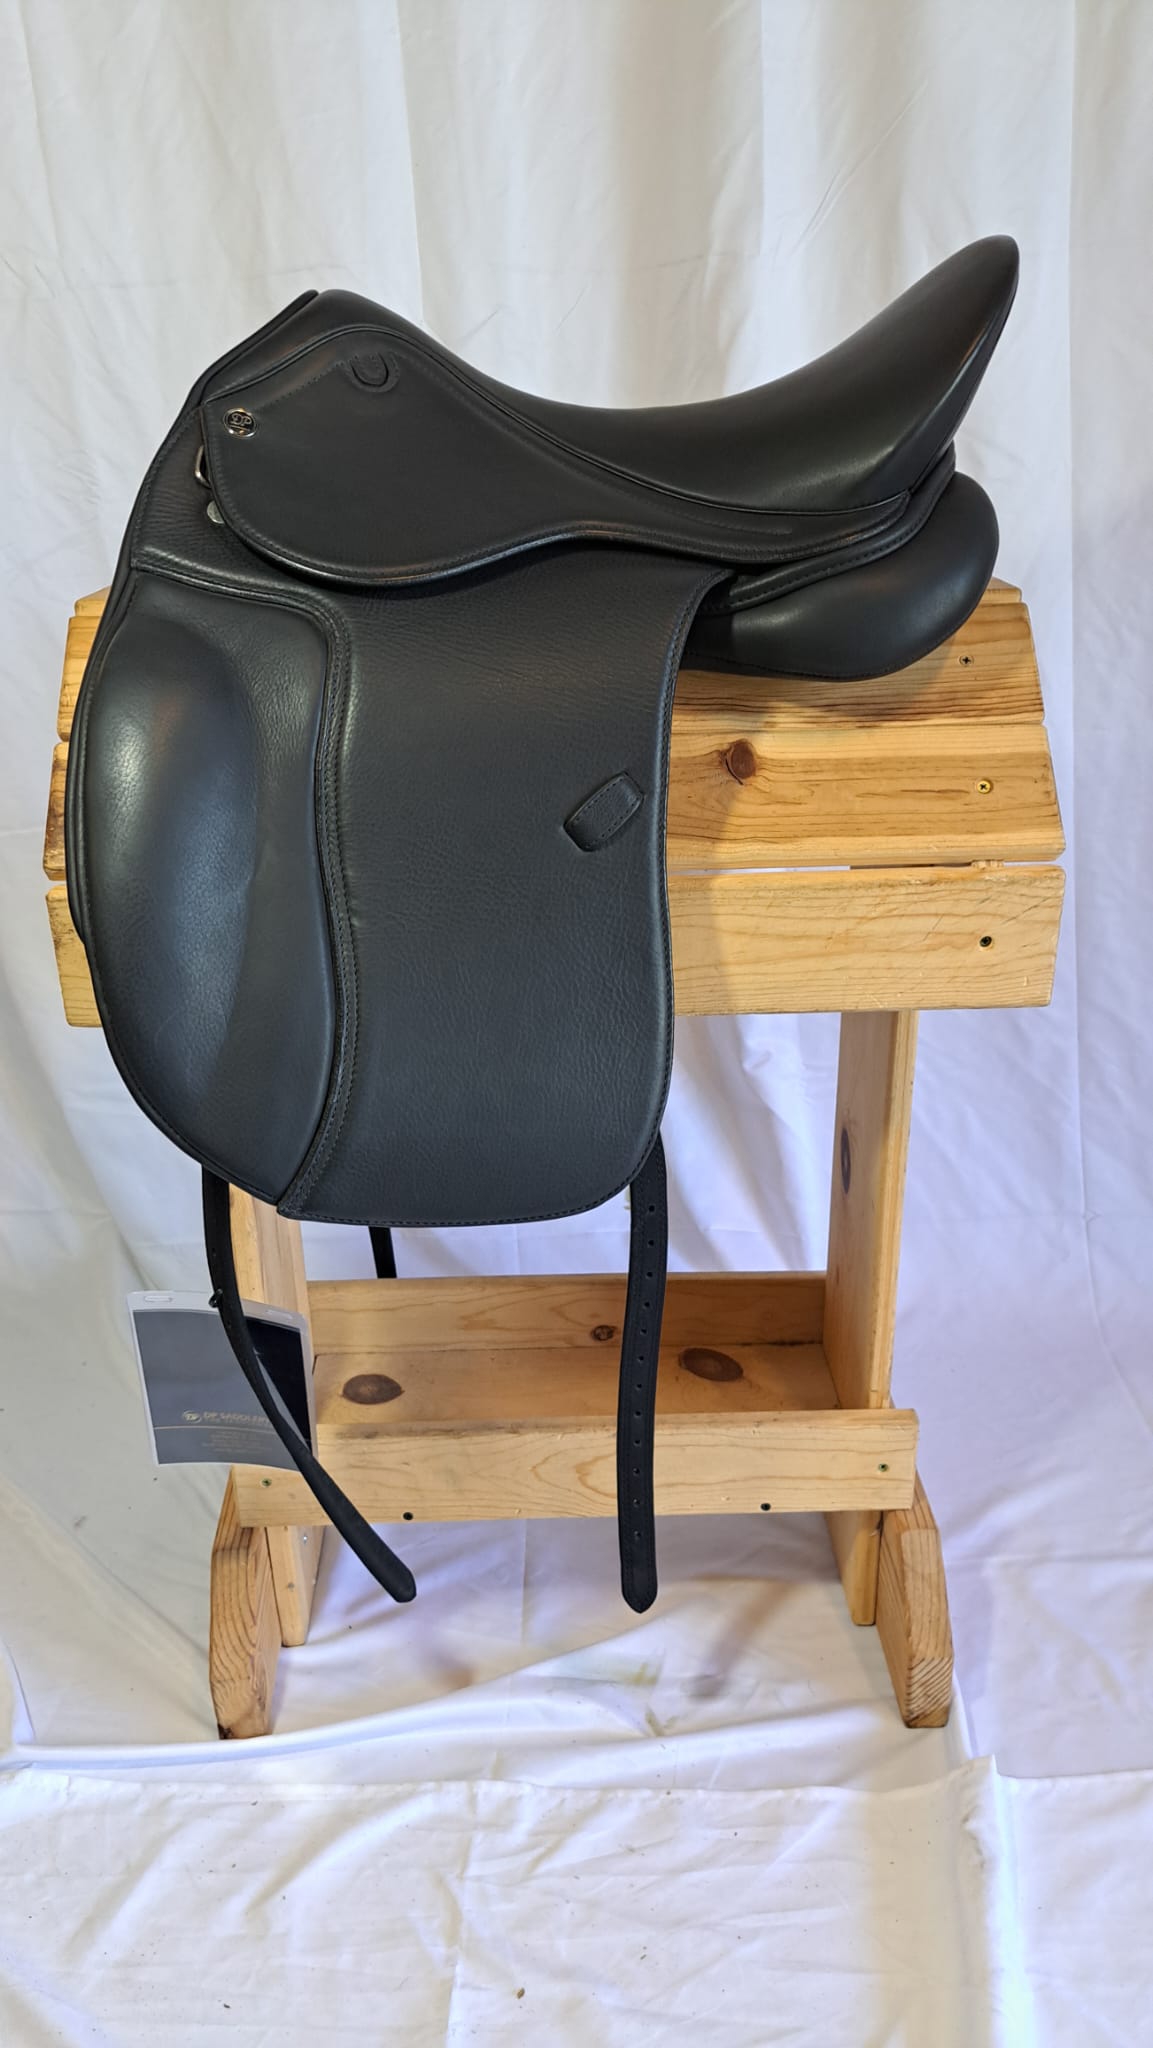 DP Saddlery Classic Dressage 6172 18.5 in